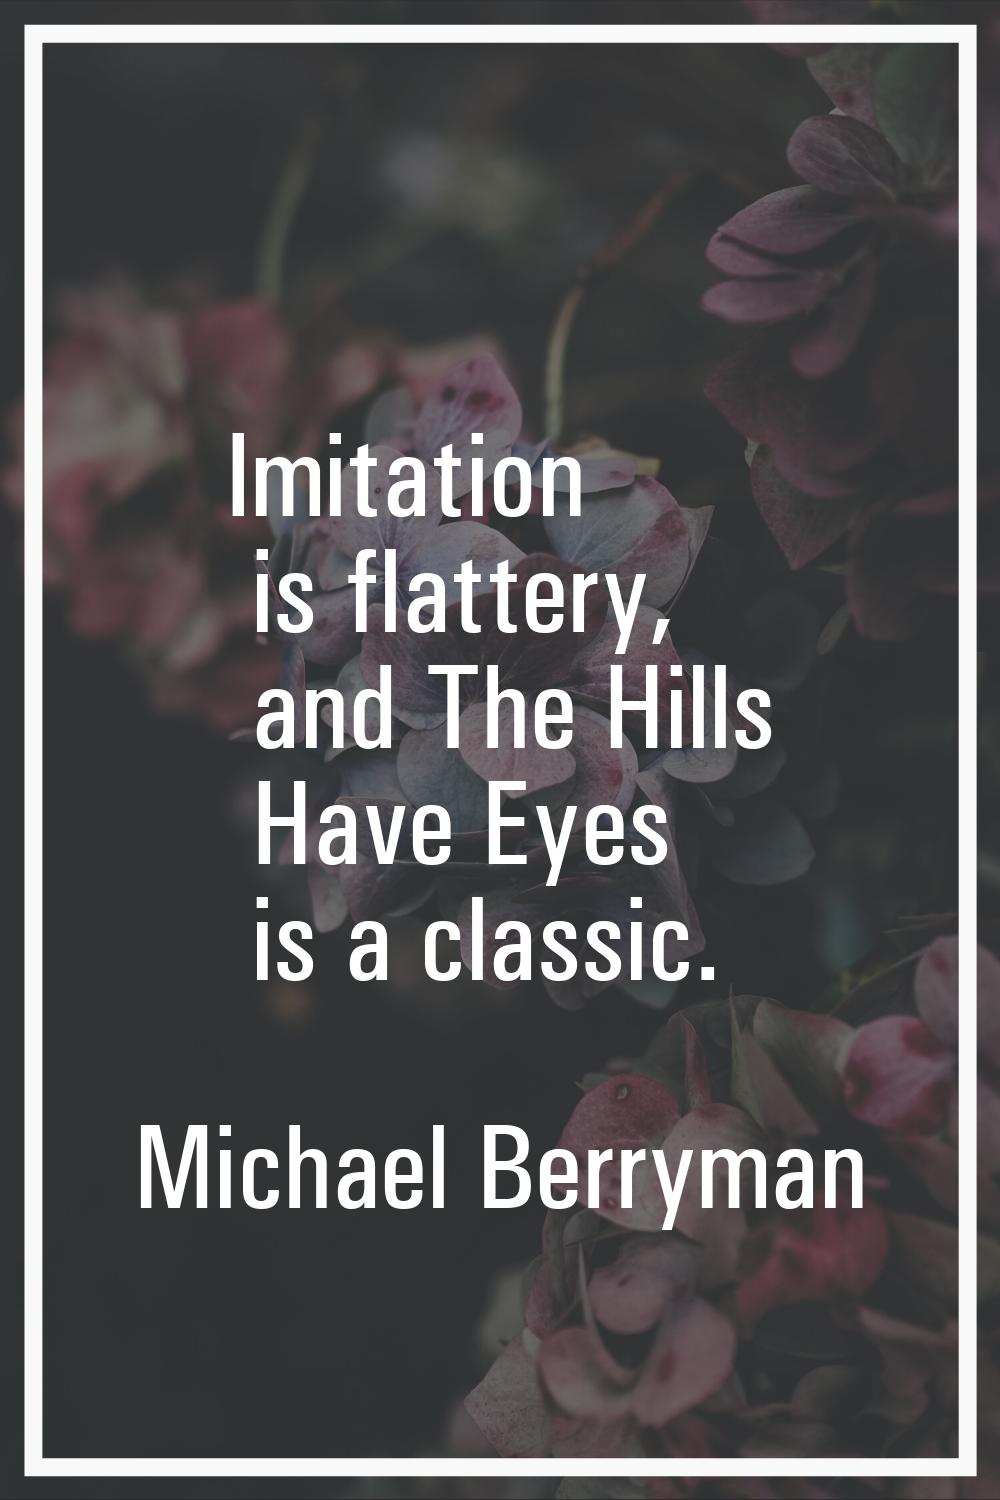 Imitation is flattery, and The Hills Have Eyes is a classic.